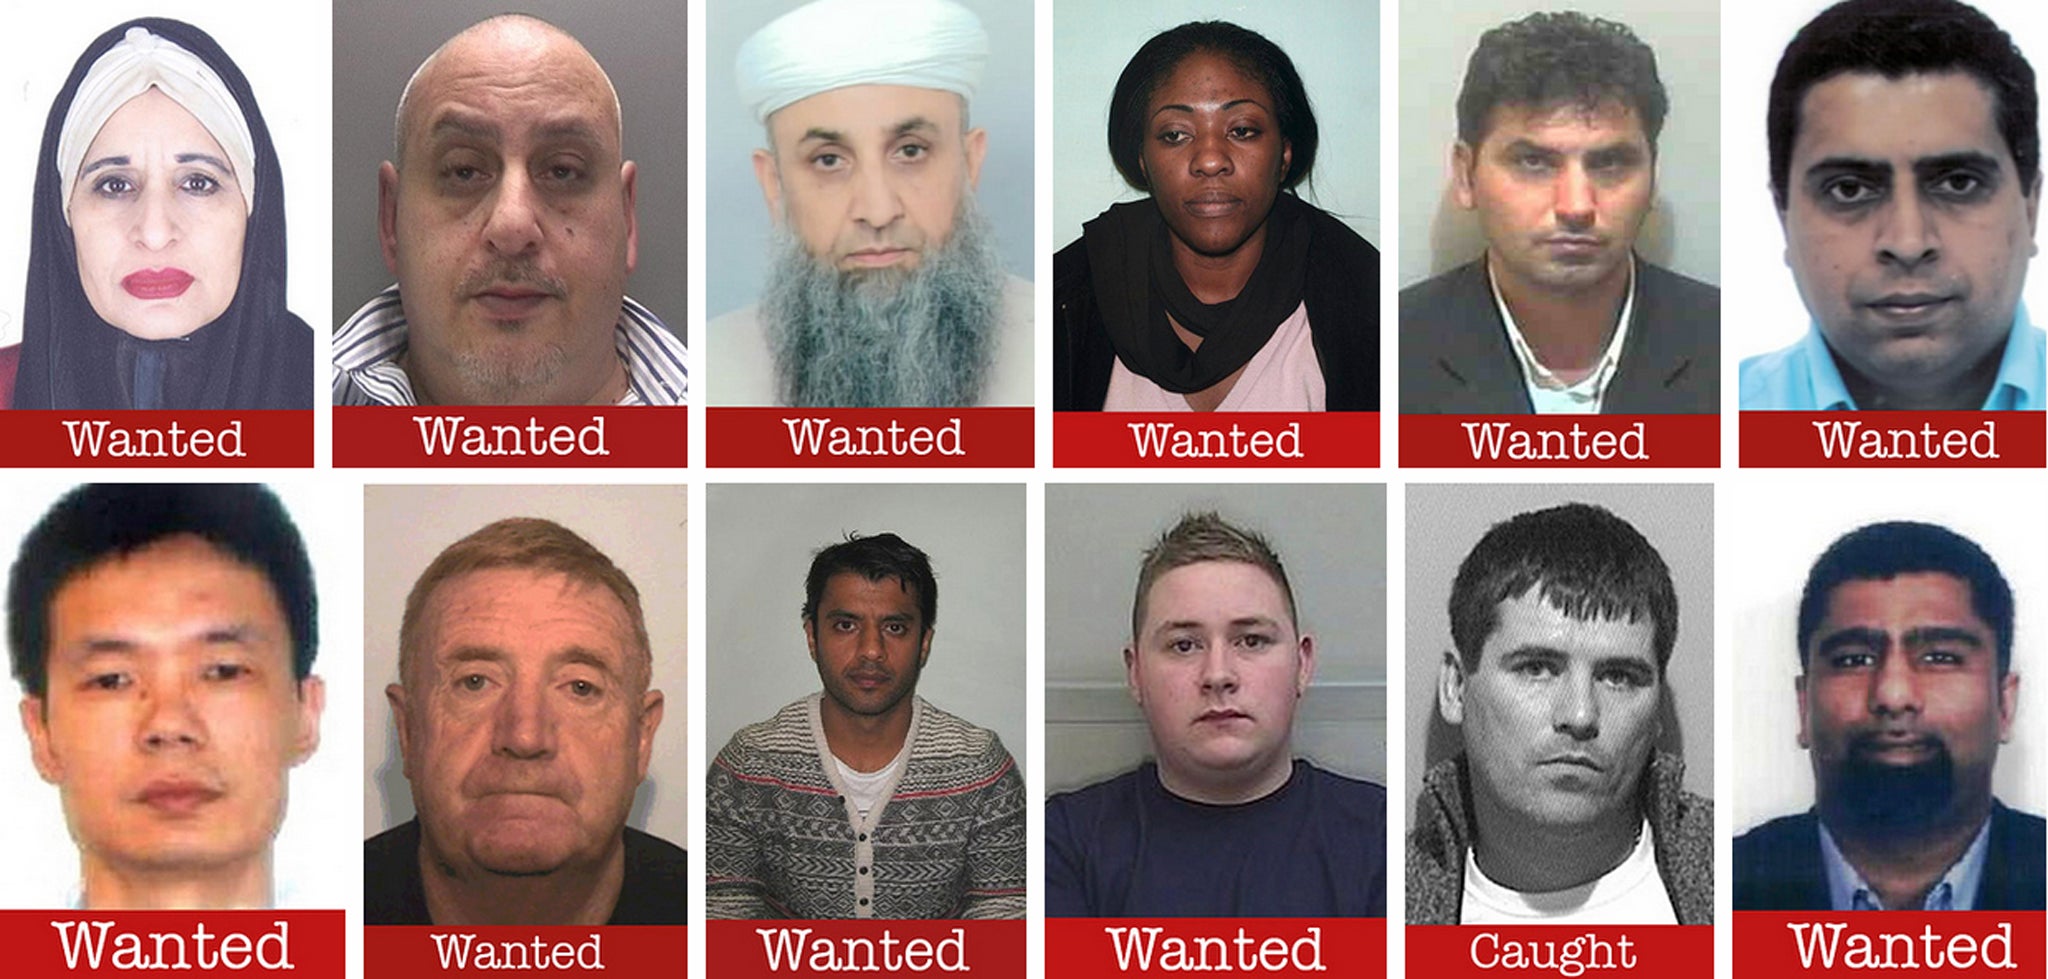 Some of the alleged tax offenders wanted by HMRC, along with Anthony Judge, who was caught at Heathrow Airport on 4 July while travelling on a false passport and has since pleaded guilty